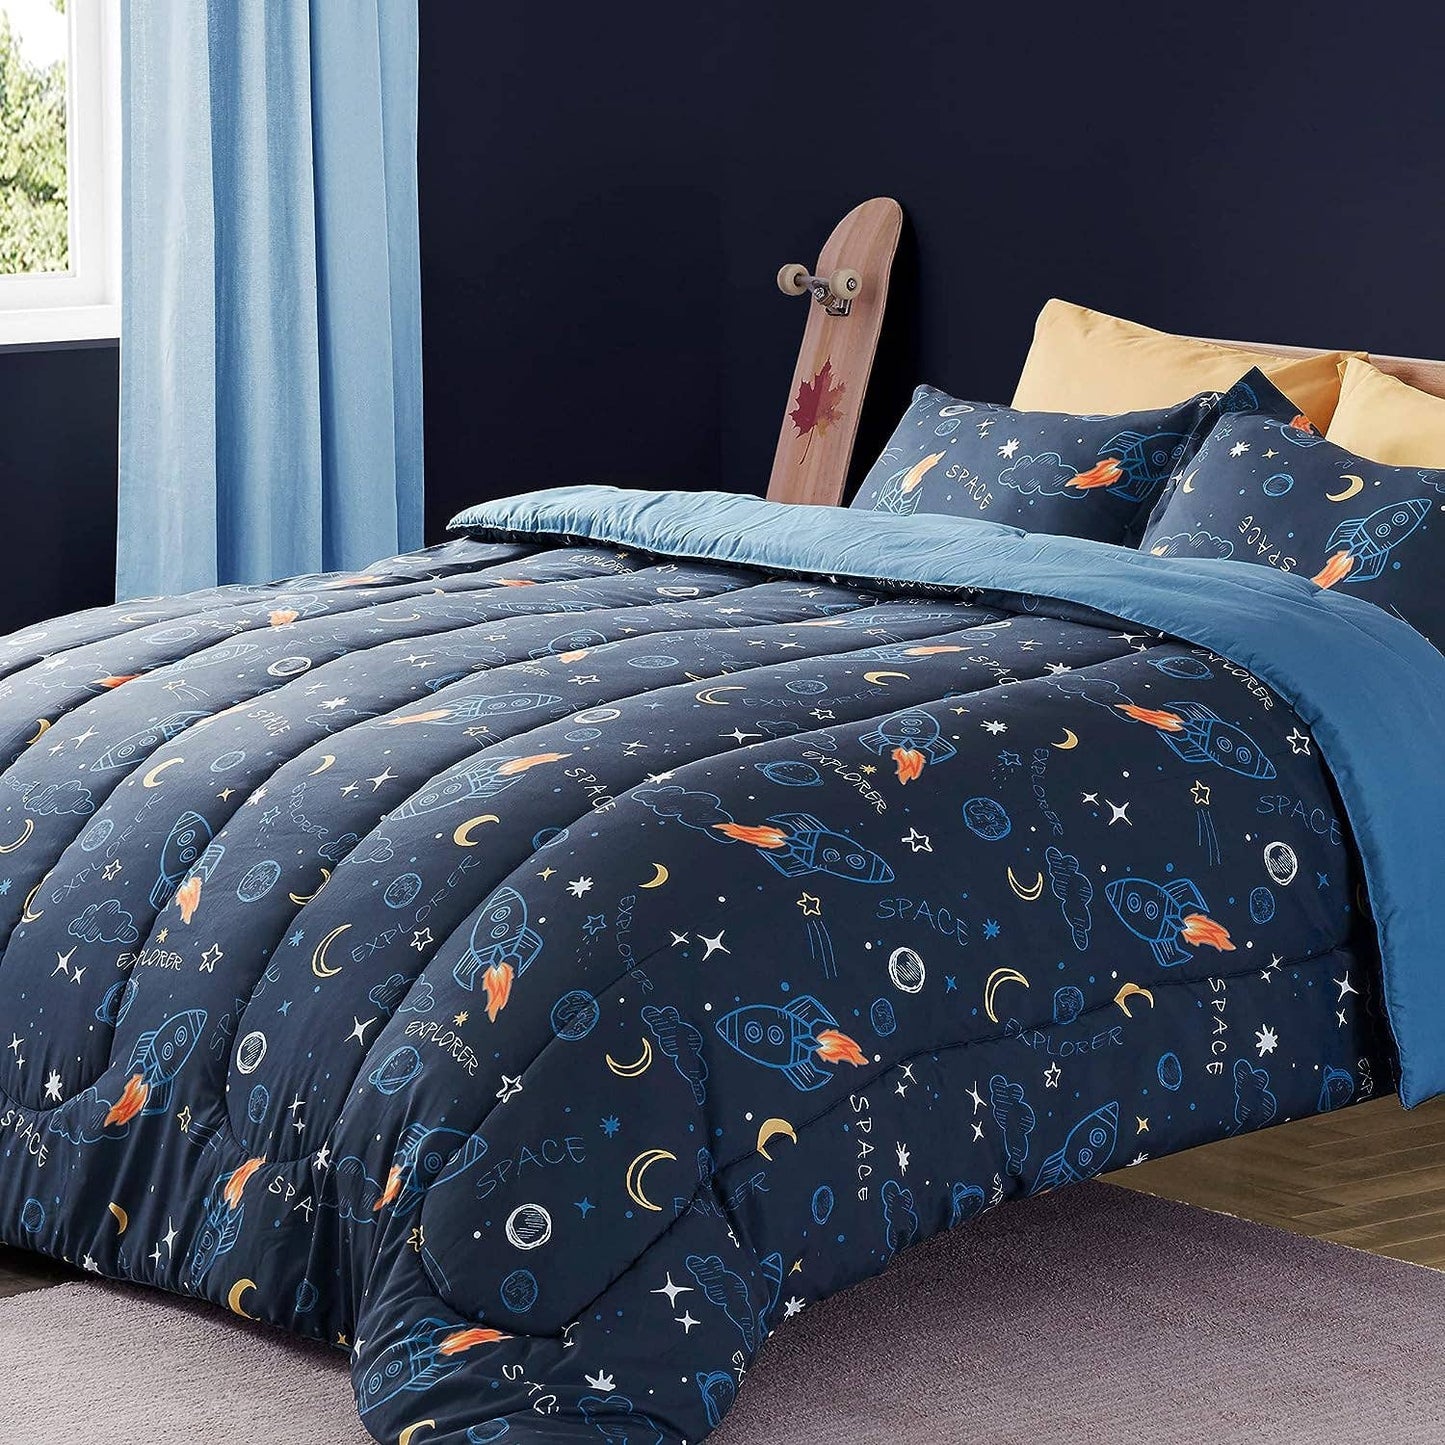 NEW SLEEP ZONE Kids Bedding Twin Comforter and 1 Pillow Case WASHABLE